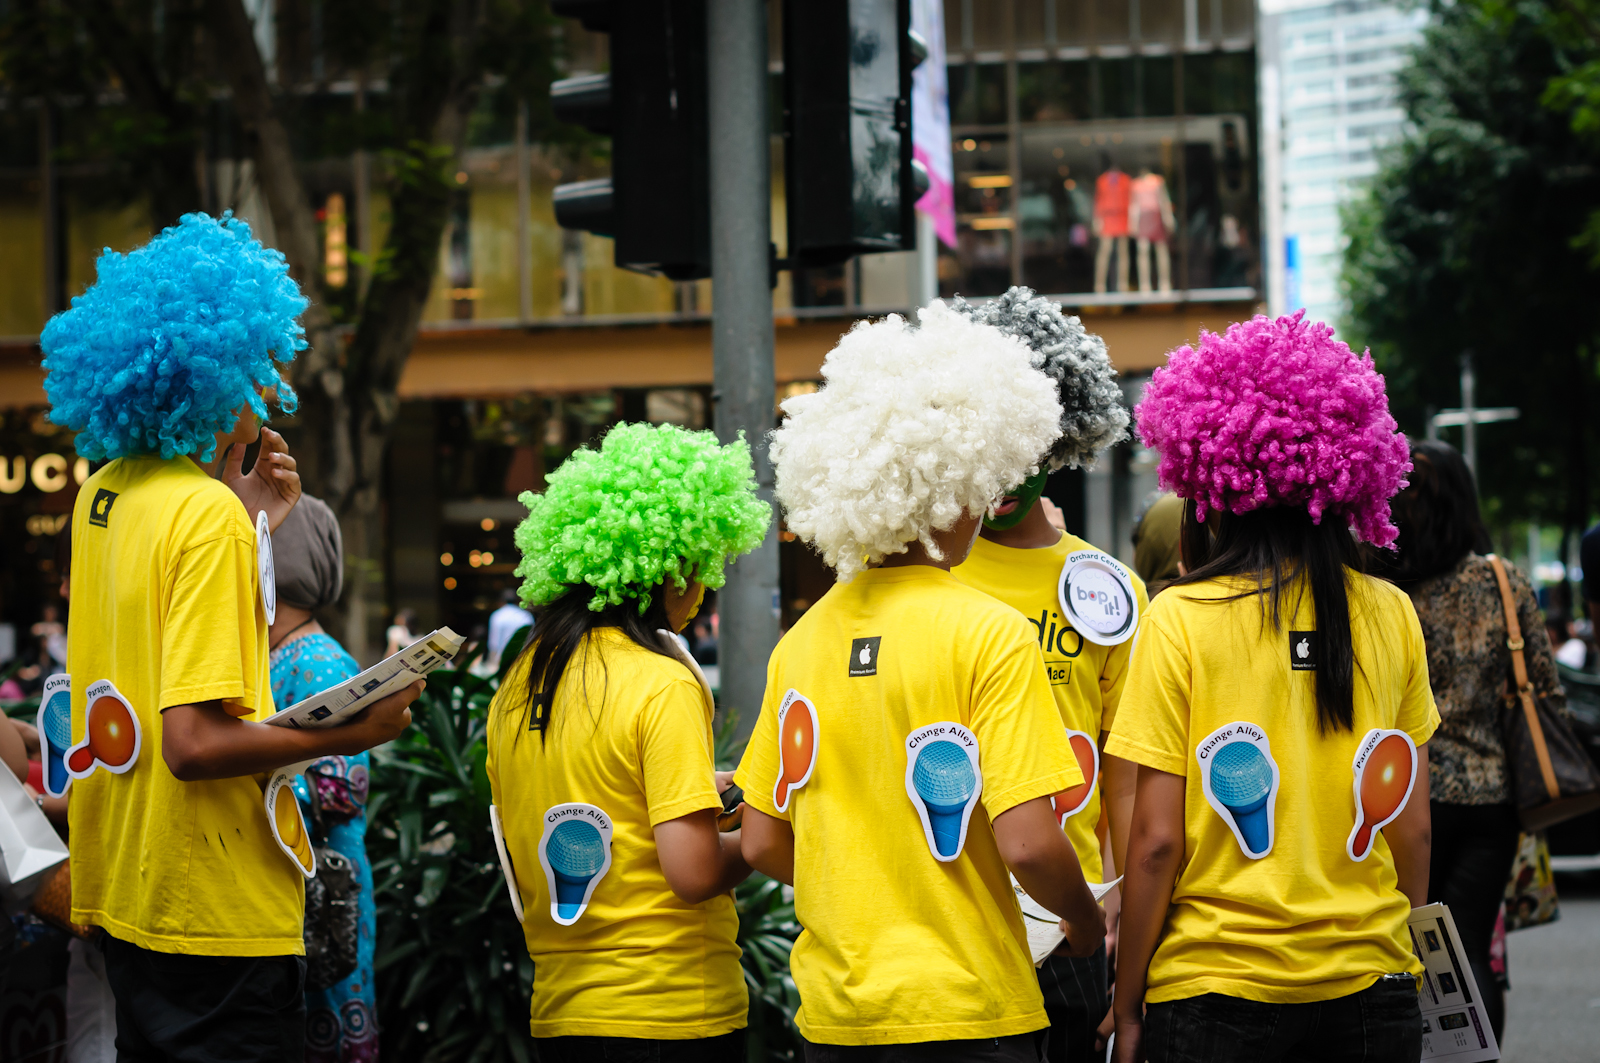 Street photography - iStudio staff in colourful afro wigs